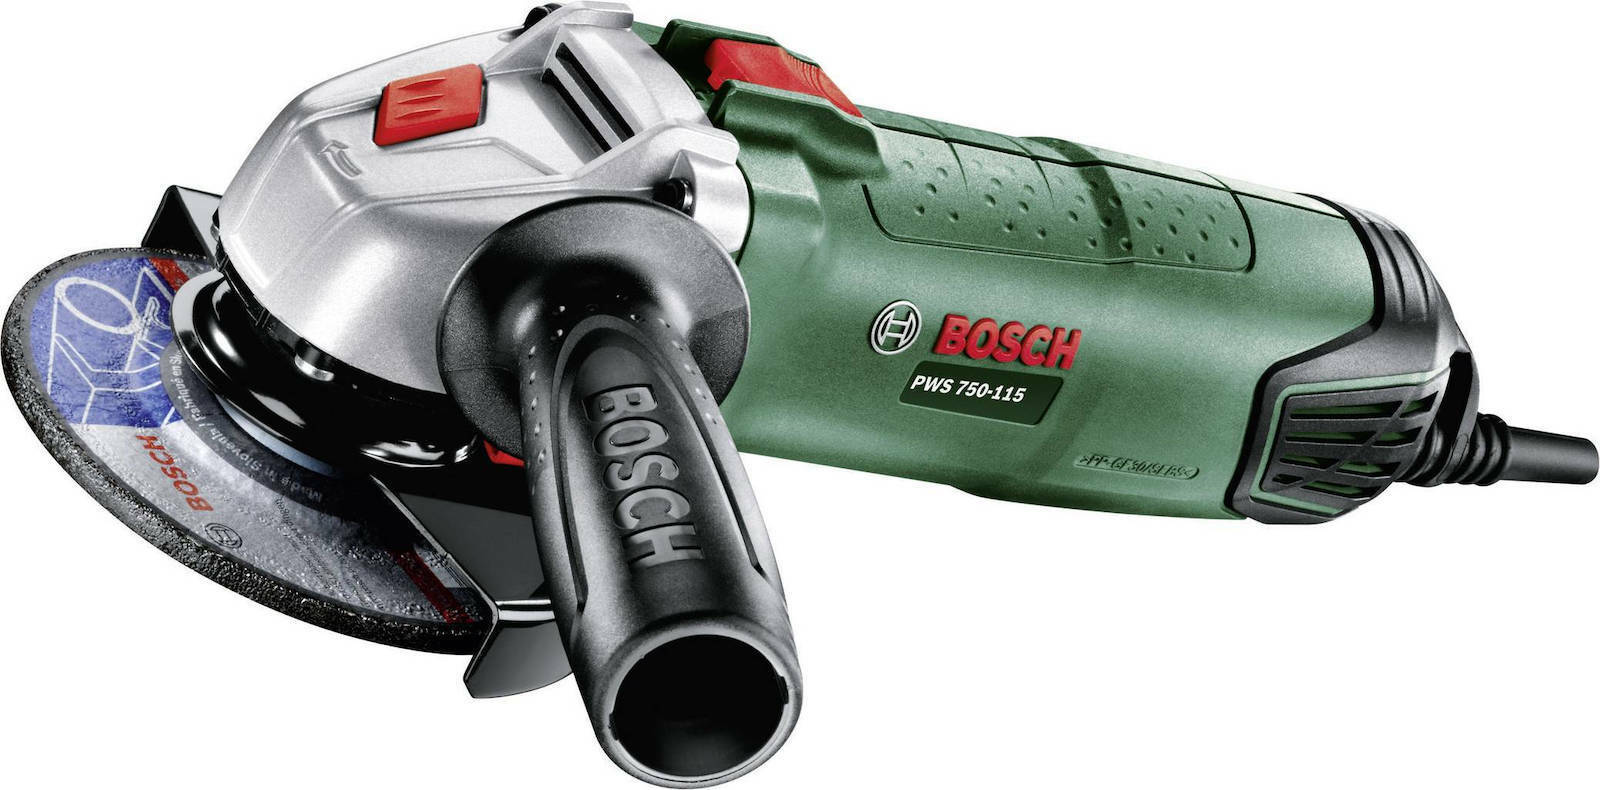 Bosch Home and Garden Angle Grinder PWS 750-115 (750 W, disc